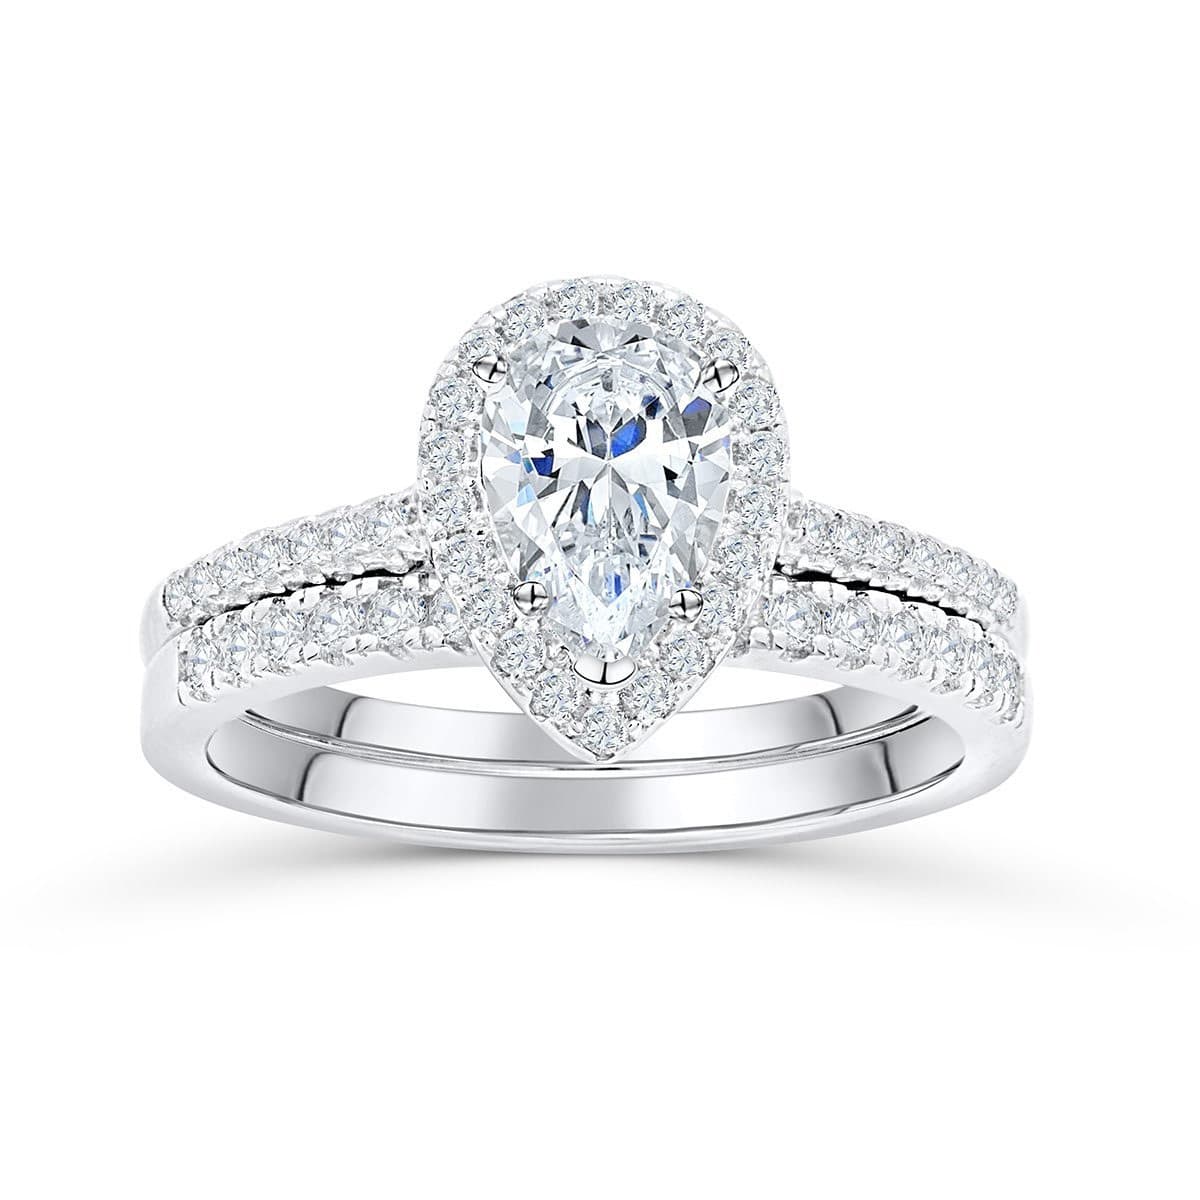 Why is Everyone Obsessed with Oval Engagement Rings? - GOODSTONE